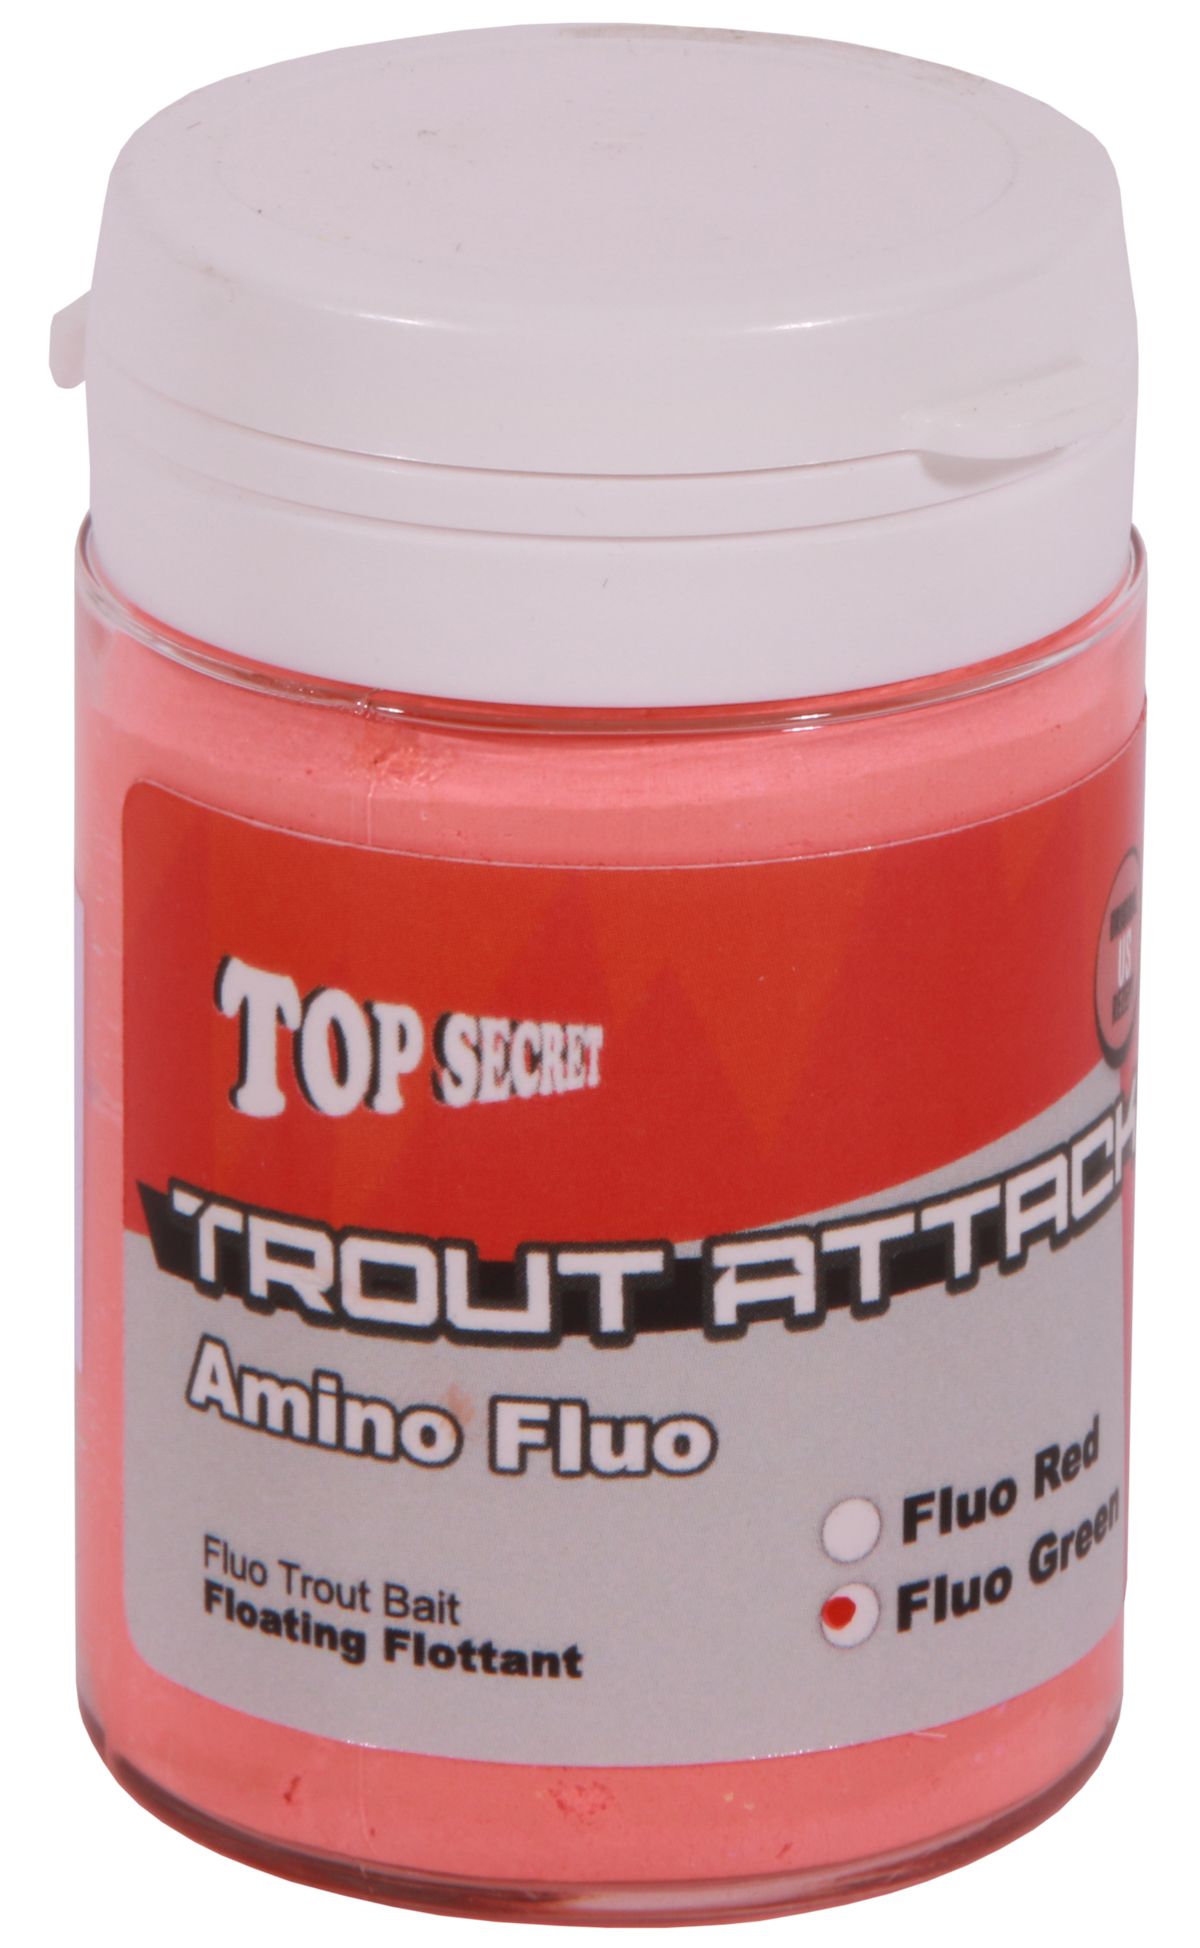 Top Secret Trout Attac Fluo 60g - Yellow Green